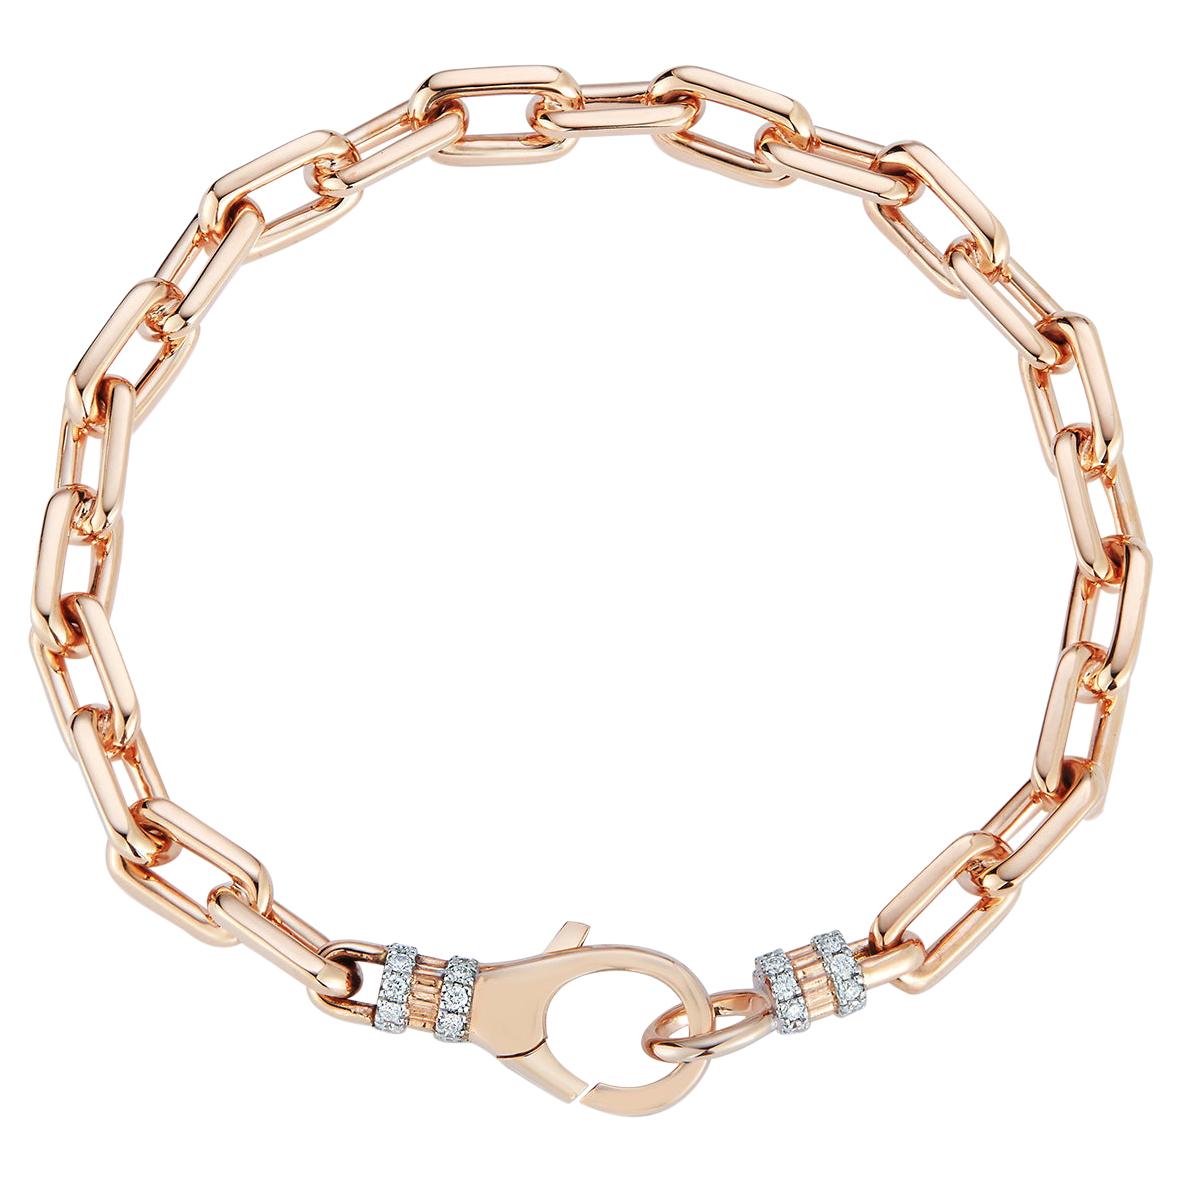 Walters Faith 18K Rose Gold Chain Link Bracelet with Diamond Lobster Clasp